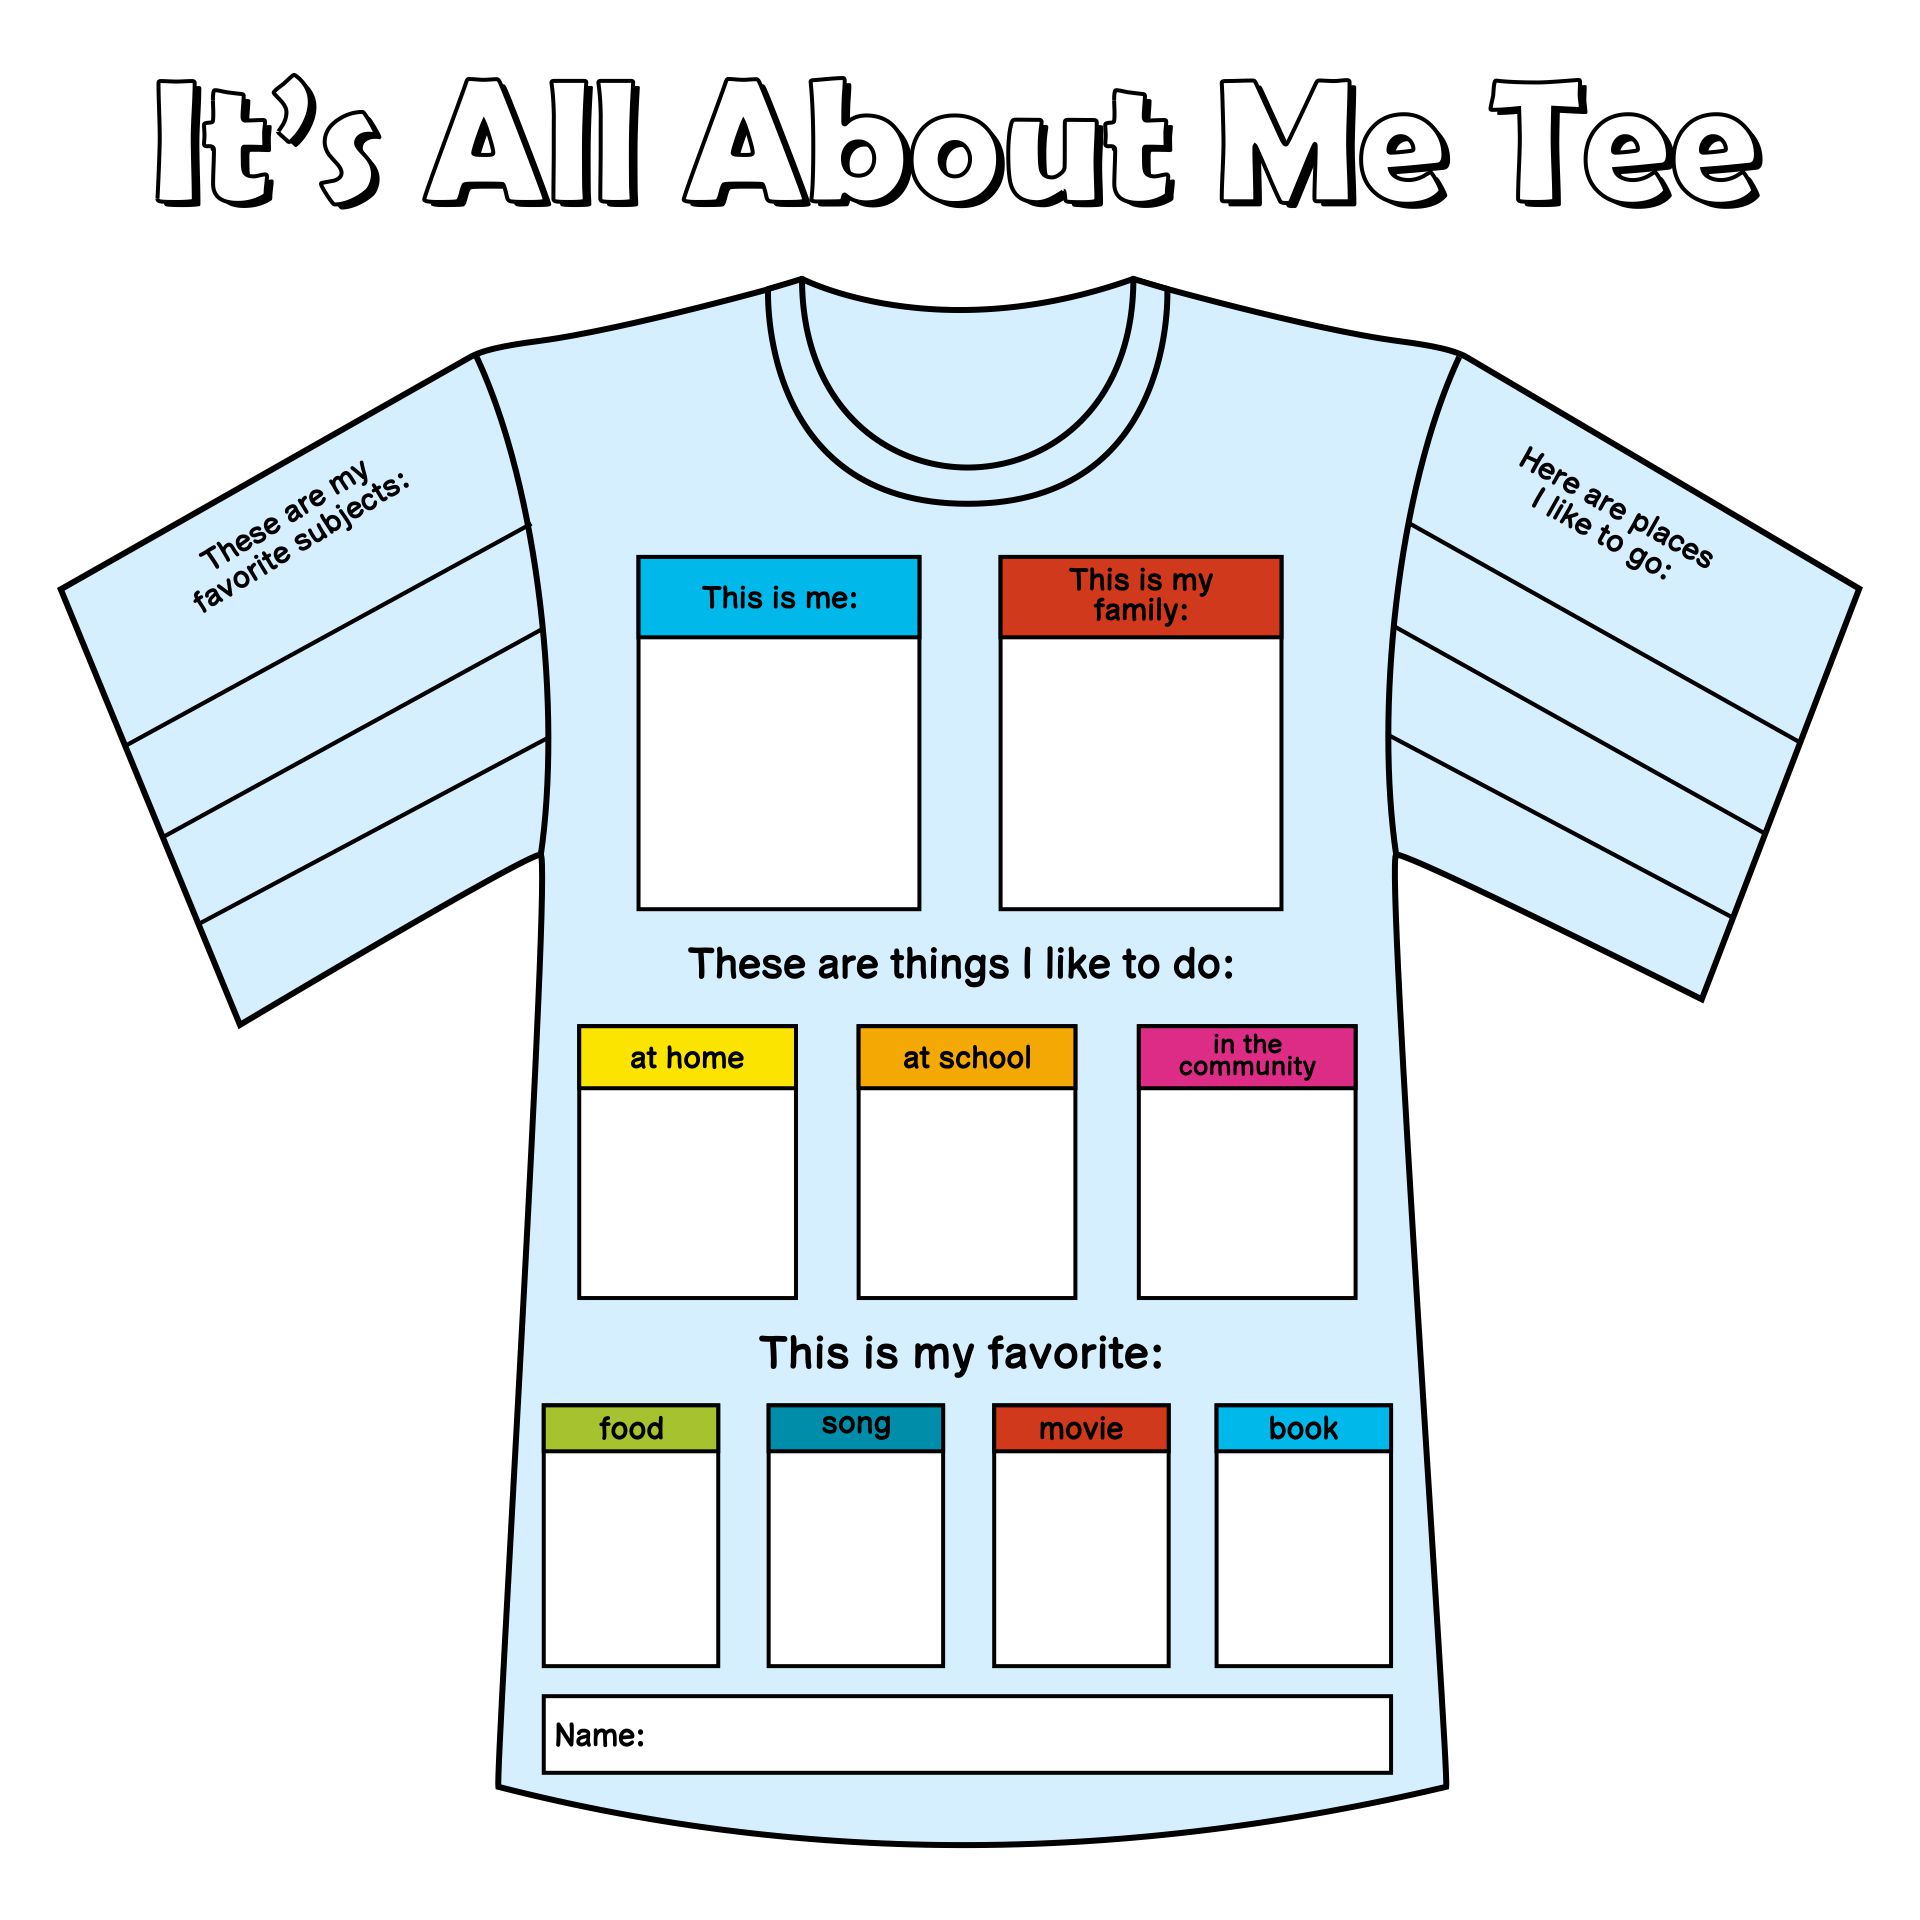 About Me T-shirt Icebreaker For Students